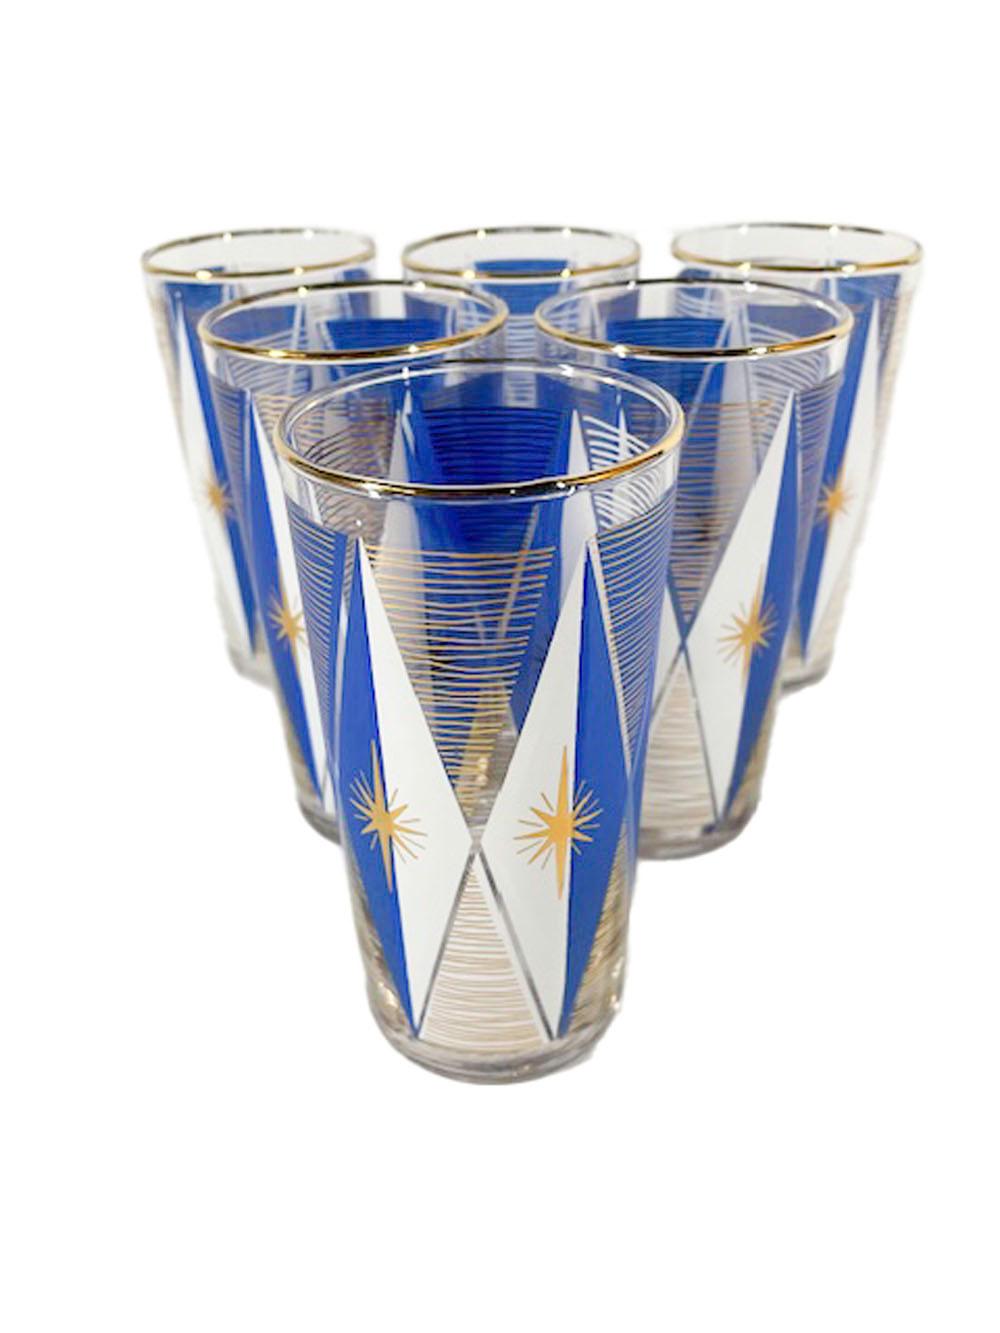 20th Century Six Libbey Glass Atomic Period Highball Glasses in Blue & White with 22k Gold